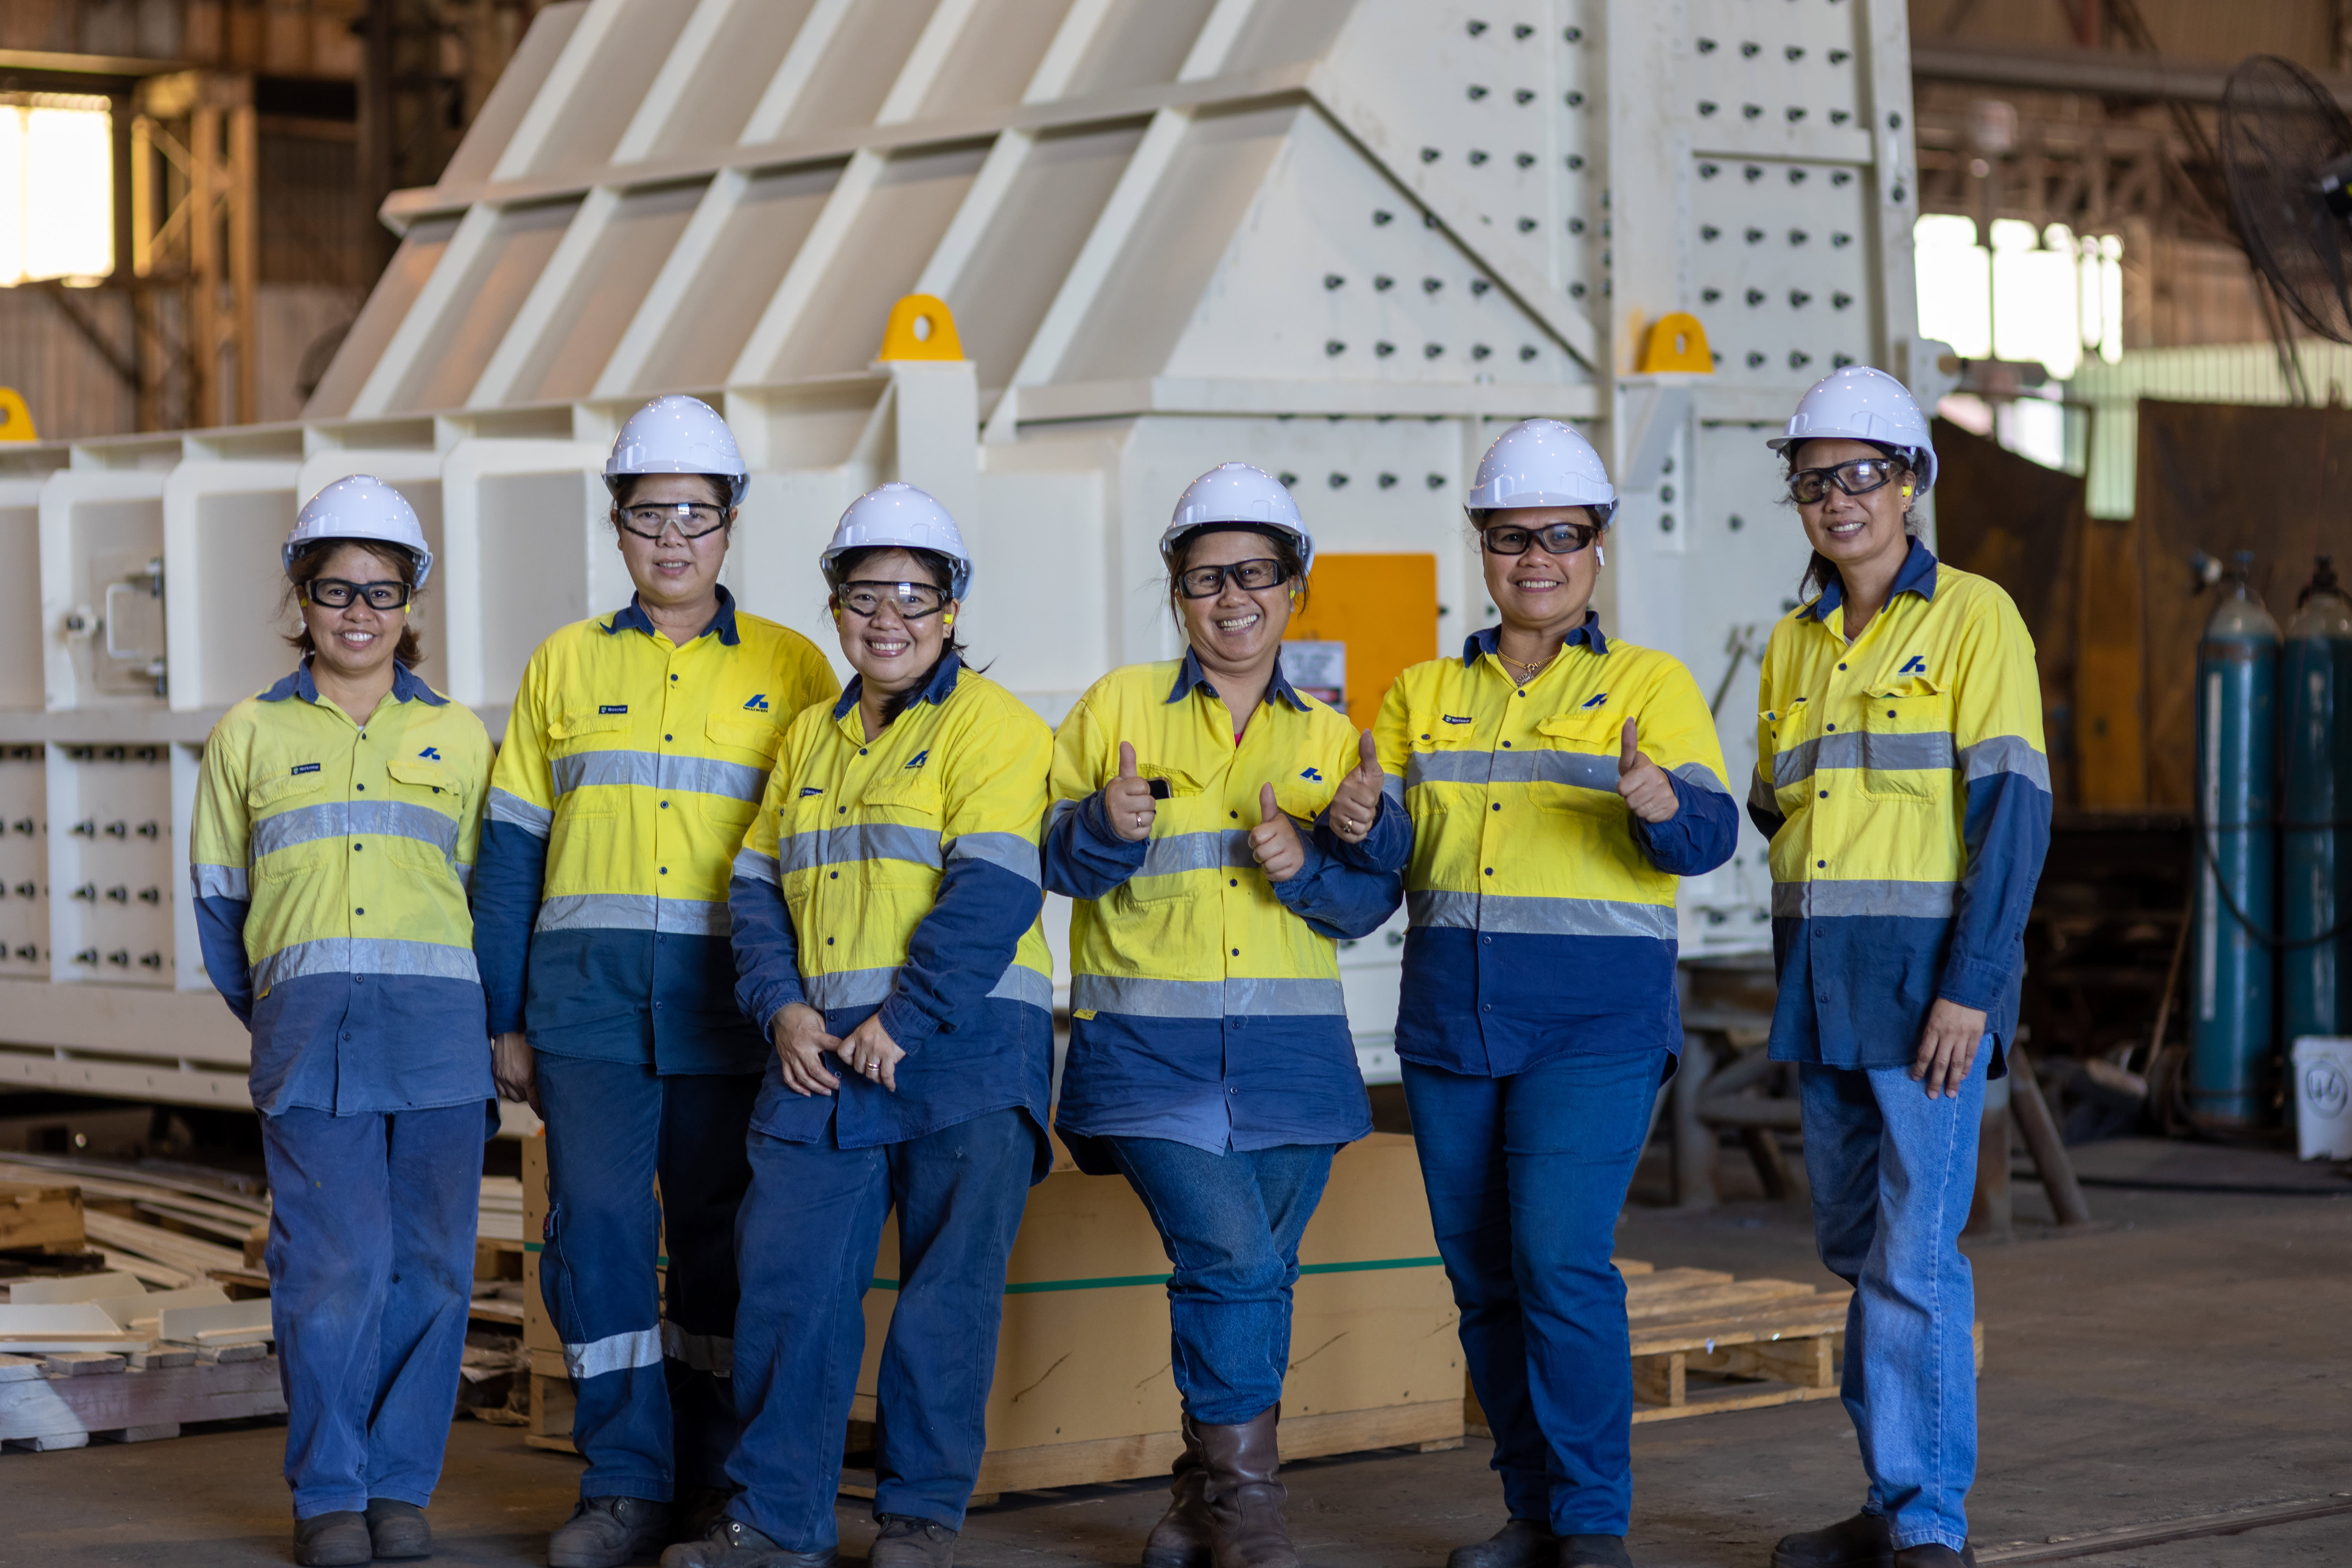 A group of six women in hi-visibility clothing stand in front of a large white mining chute component in a workshop.